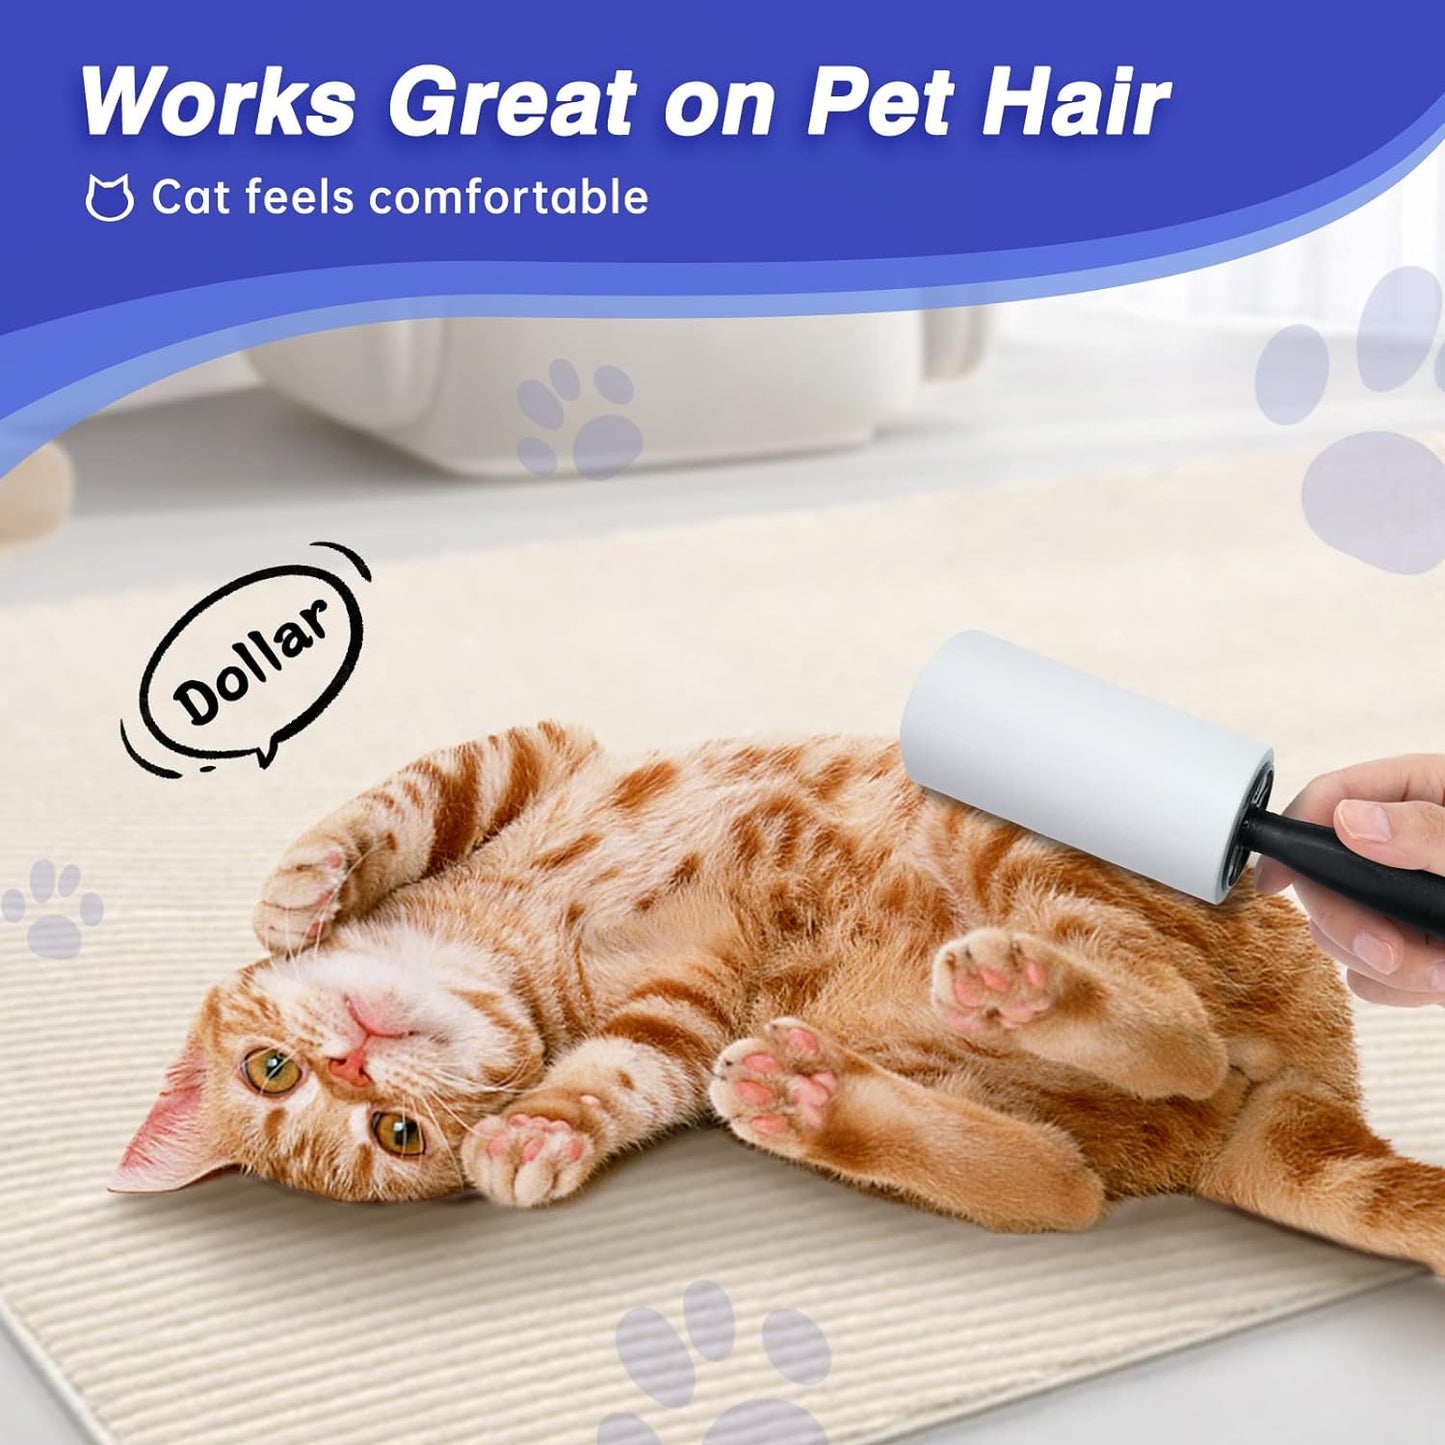 Lint Rollers For Pet Hair Extra Sticky, 540 Sheets 6 Refills Lint Roller With 2 Upgrade Handles, Portable Lint Remover Brush Pet Hair Remover For Dog Cat Hair Removal, Clothes, Furniture